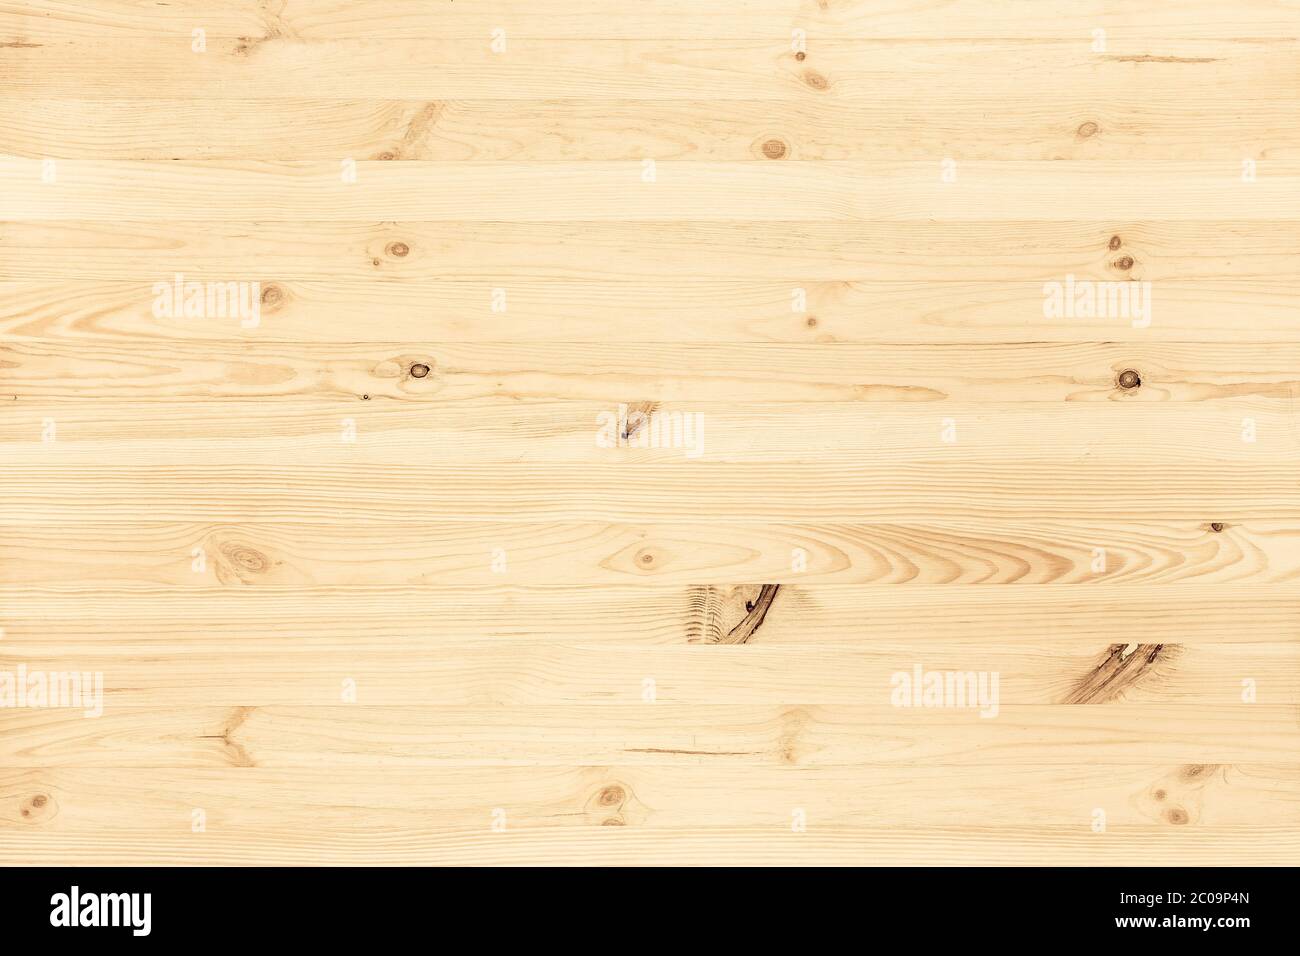 Natural light colored wood texture background viewed from above. Use this clean wooden textured material as graphic design asset for a wall, floor boa Stock Photo